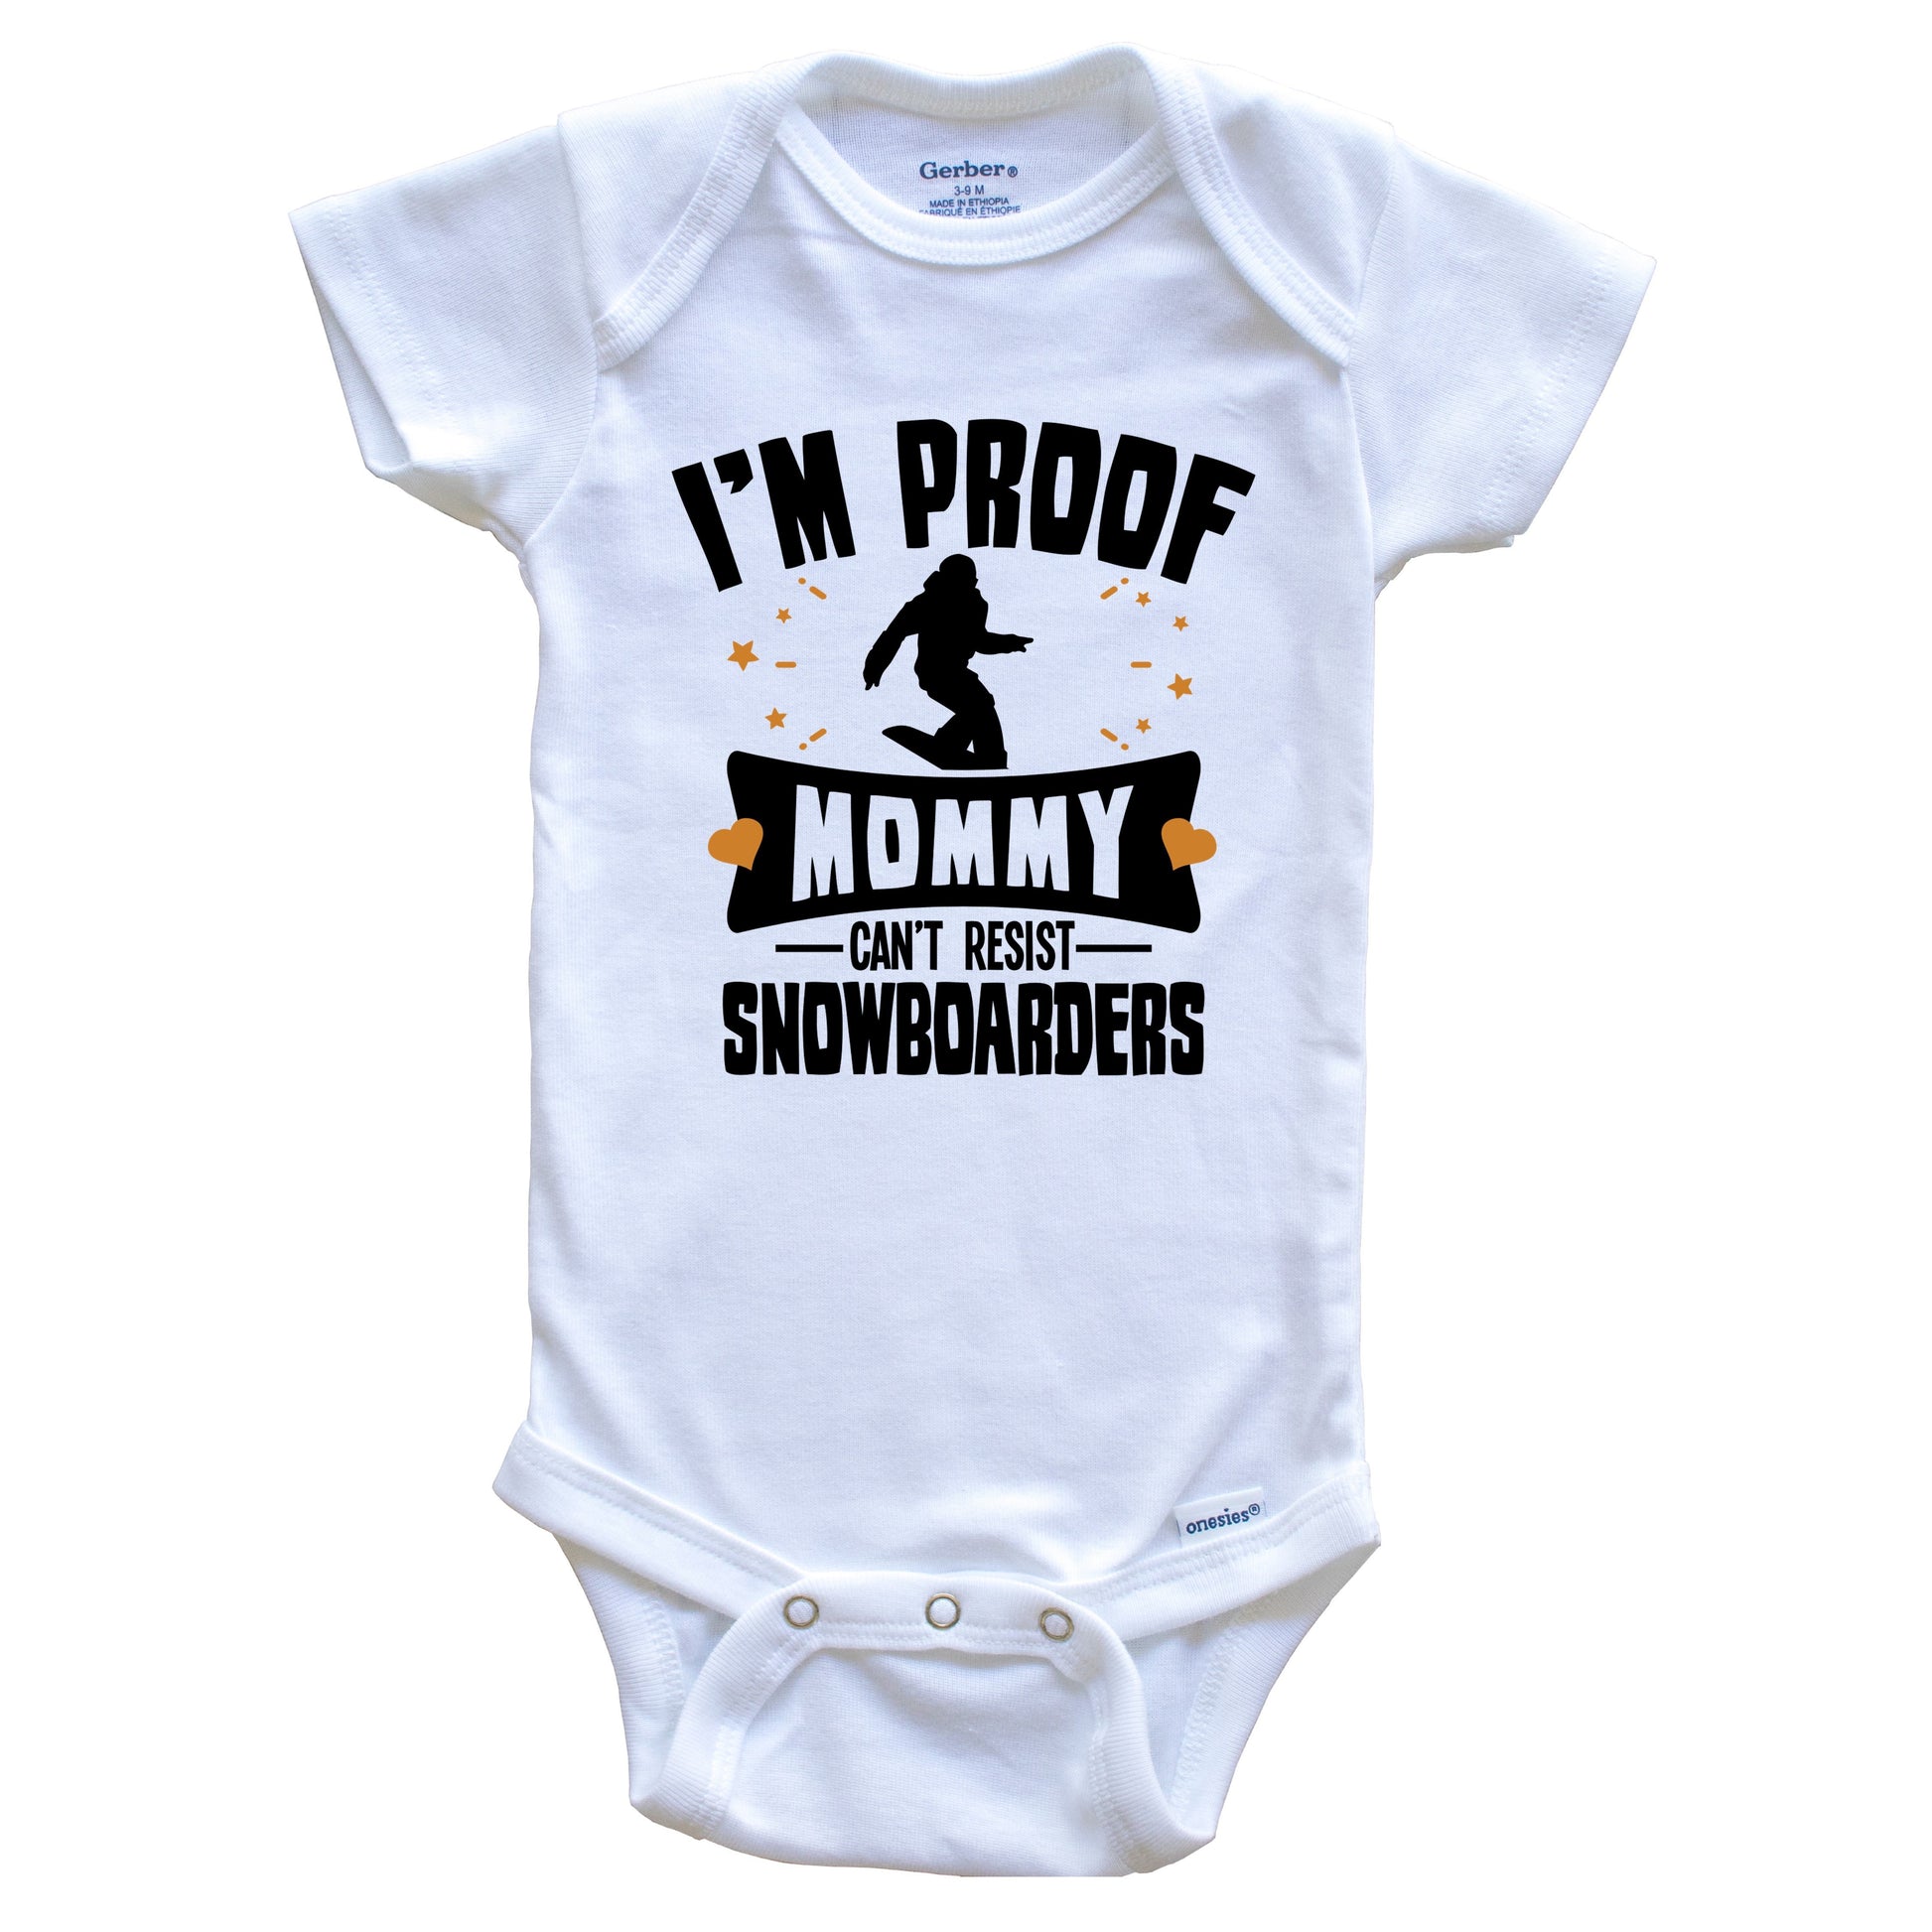 Funny Snowboarding Onesie - I'm Proof Mommy Can't Resist Snowboarders Baby Bodysuit